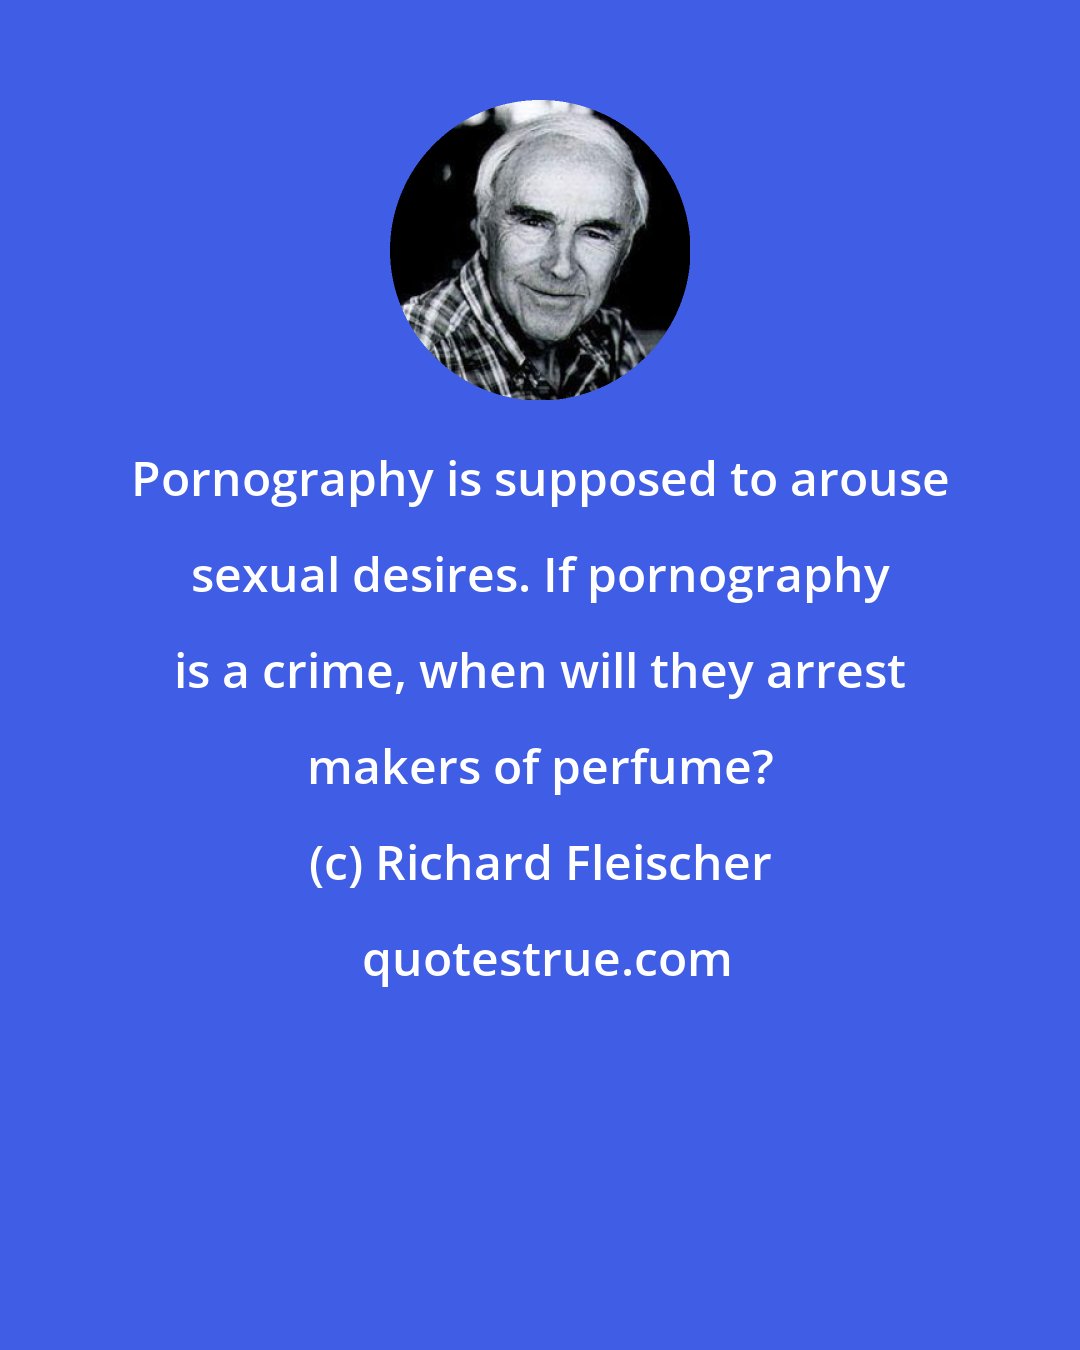 Richard Fleischer: Pornography is supposed to arouse sexual desires. If pornography is a crime, when will they arrest makers of perfume?